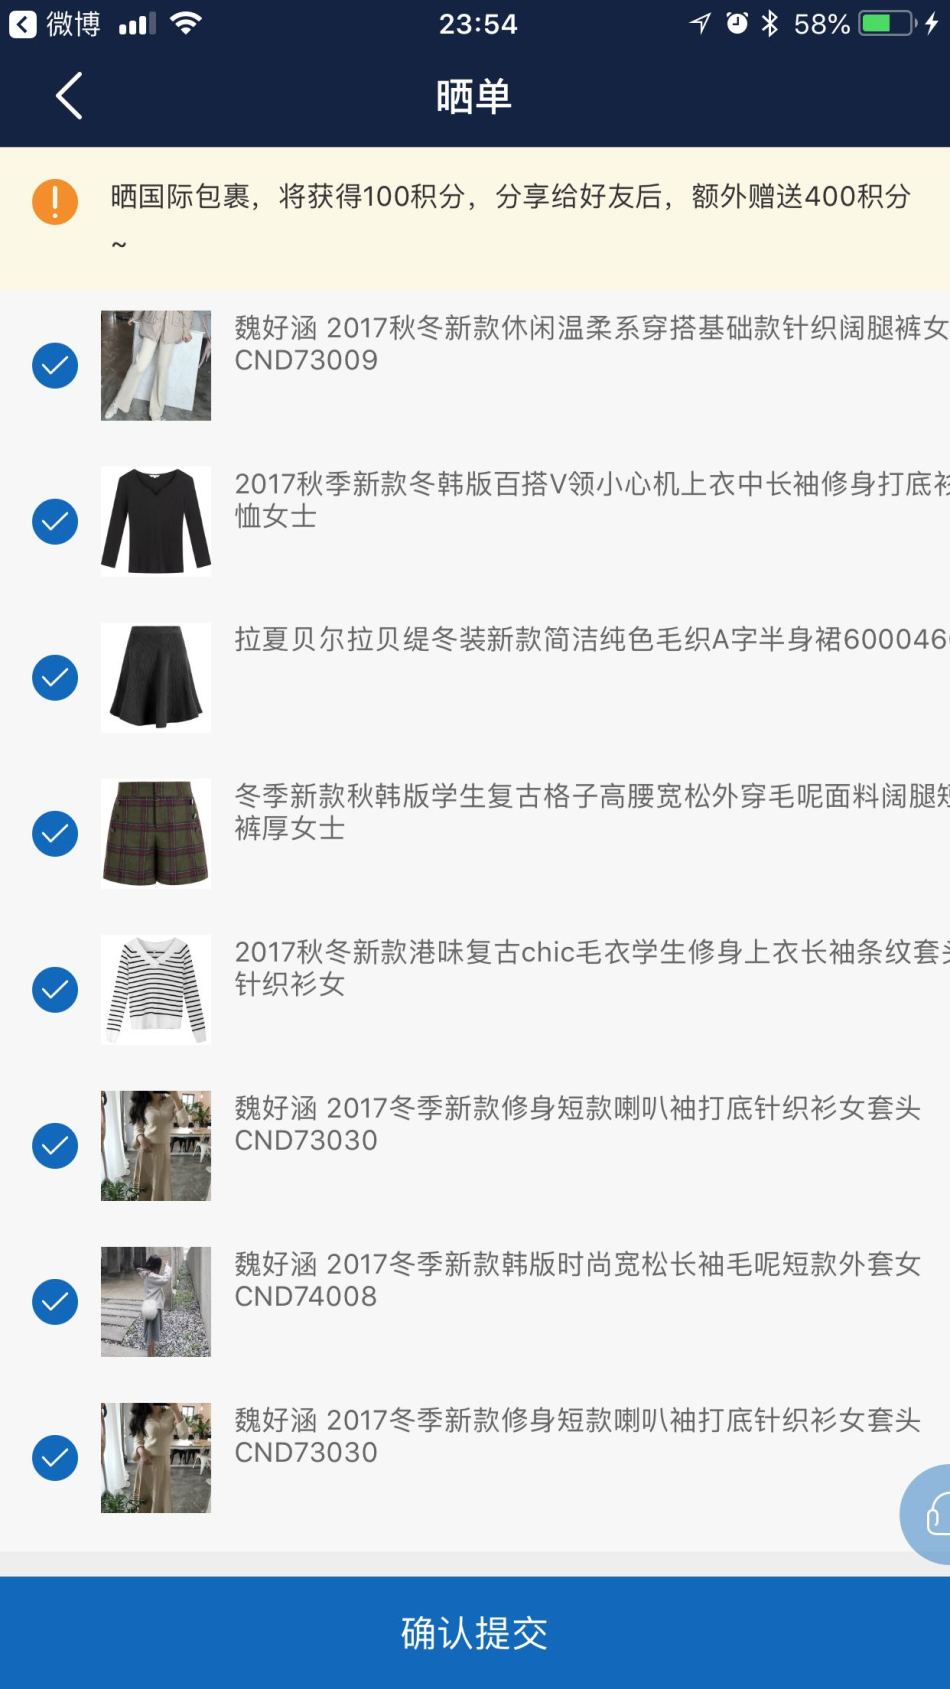 https://img1.superbuy.com/images/consult/2018/08/05/9015f62d016c916abcdeea01f3883402.jpg?x-oss-process=image/resize,w_950